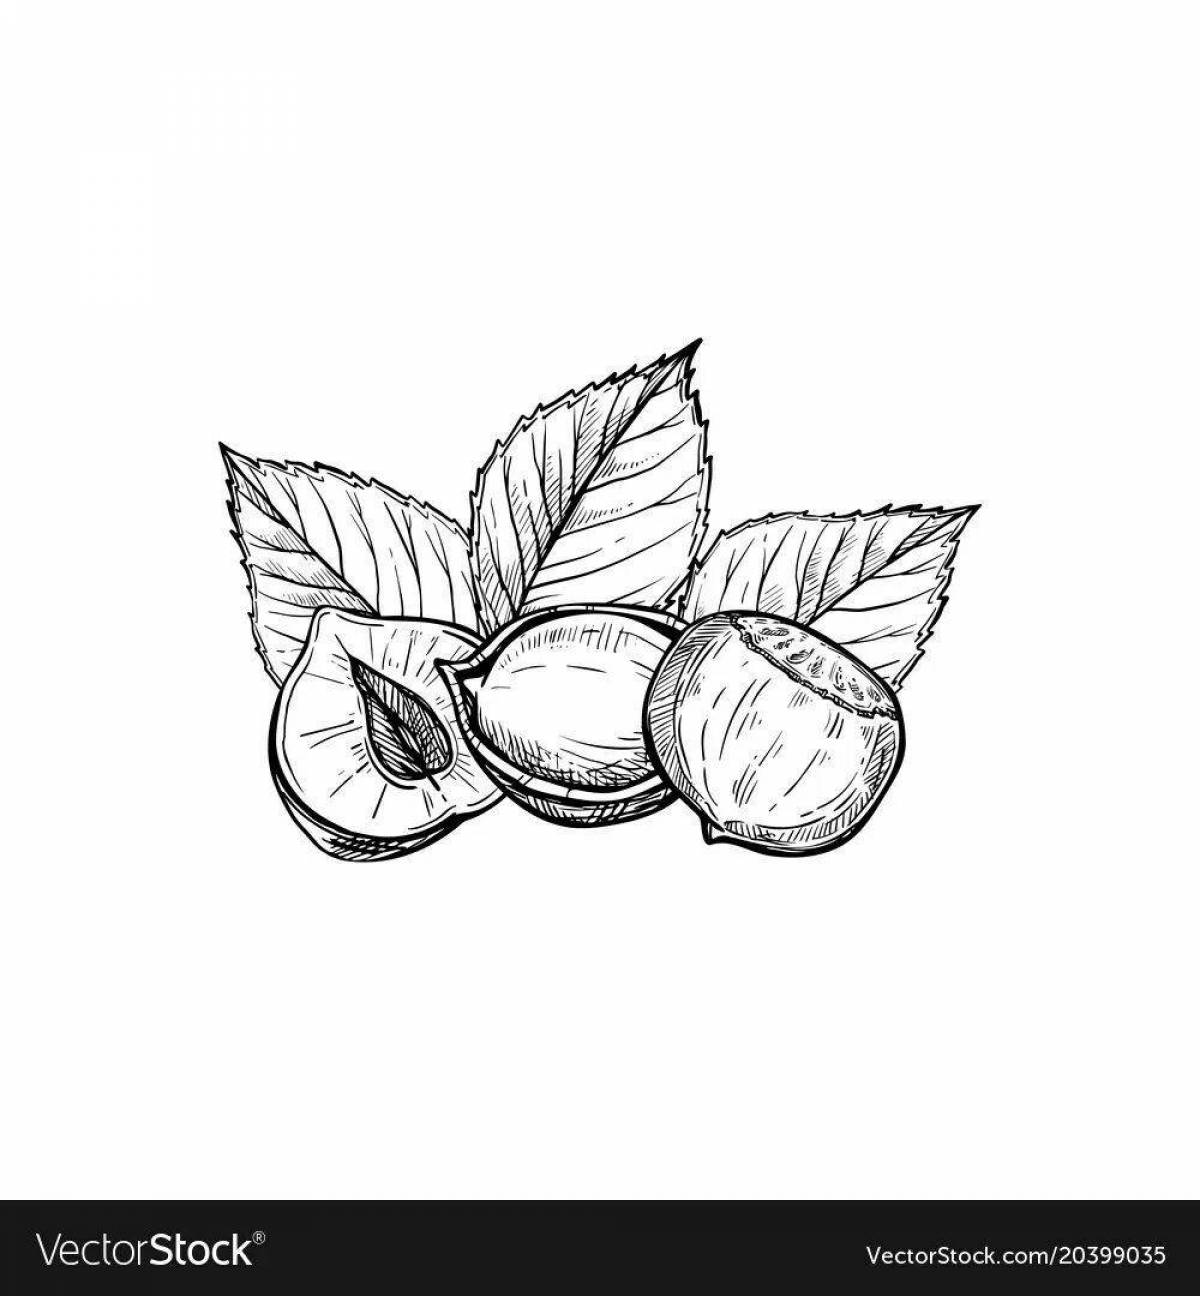 Fabulous nuts coloring pages for kids